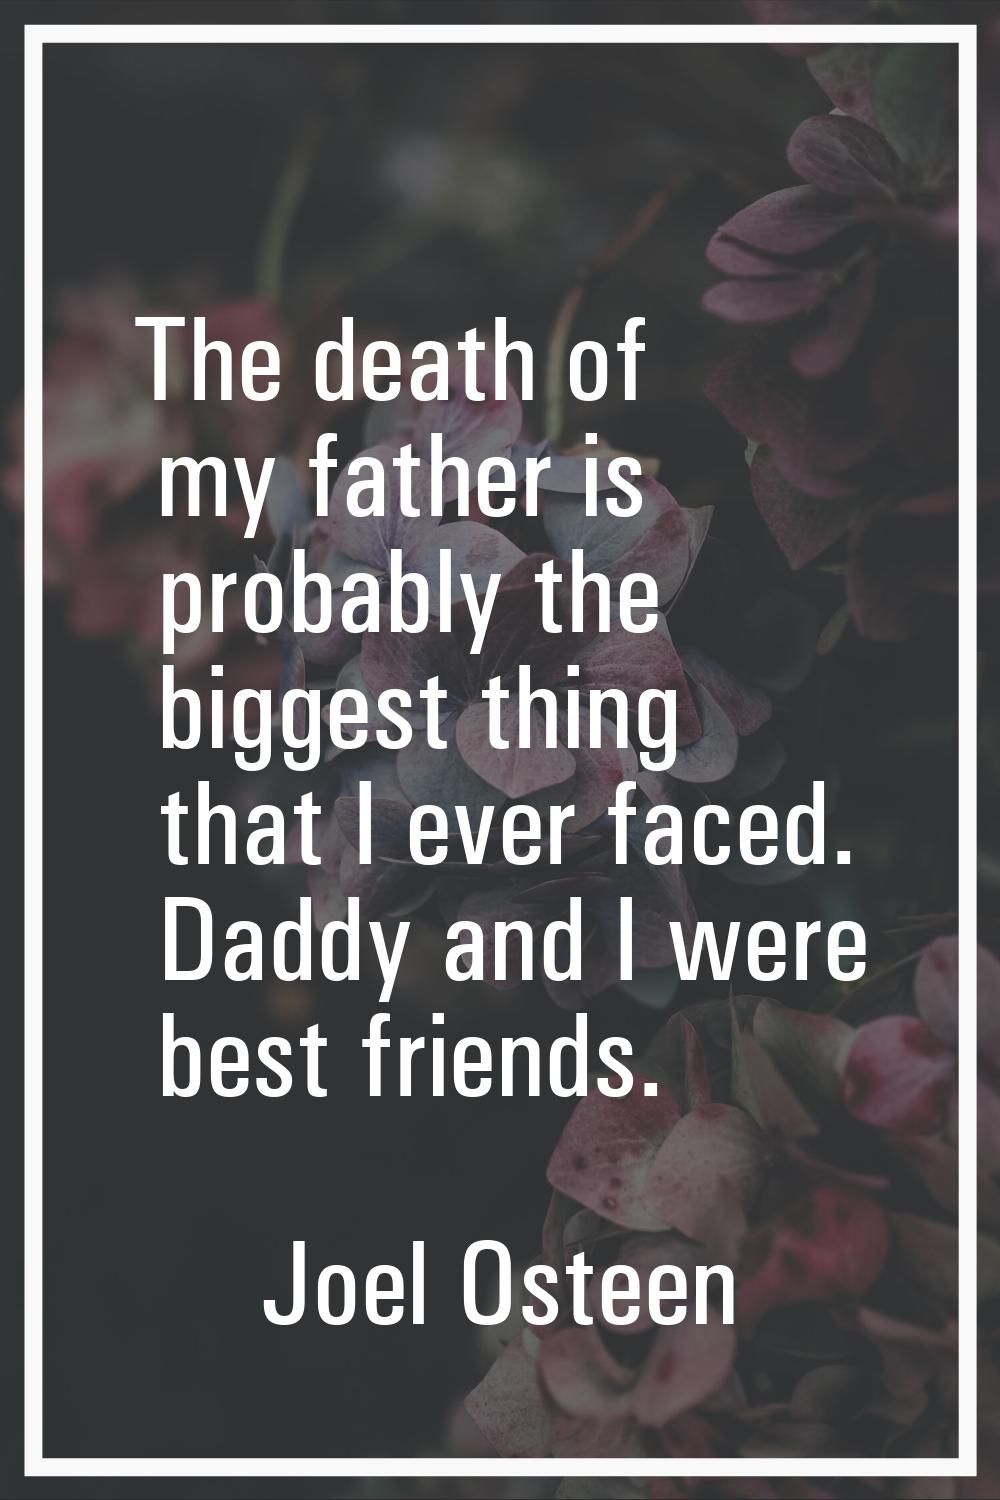 The death of my father is probably the biggest thing that I ever faced. Daddy and I were best frien